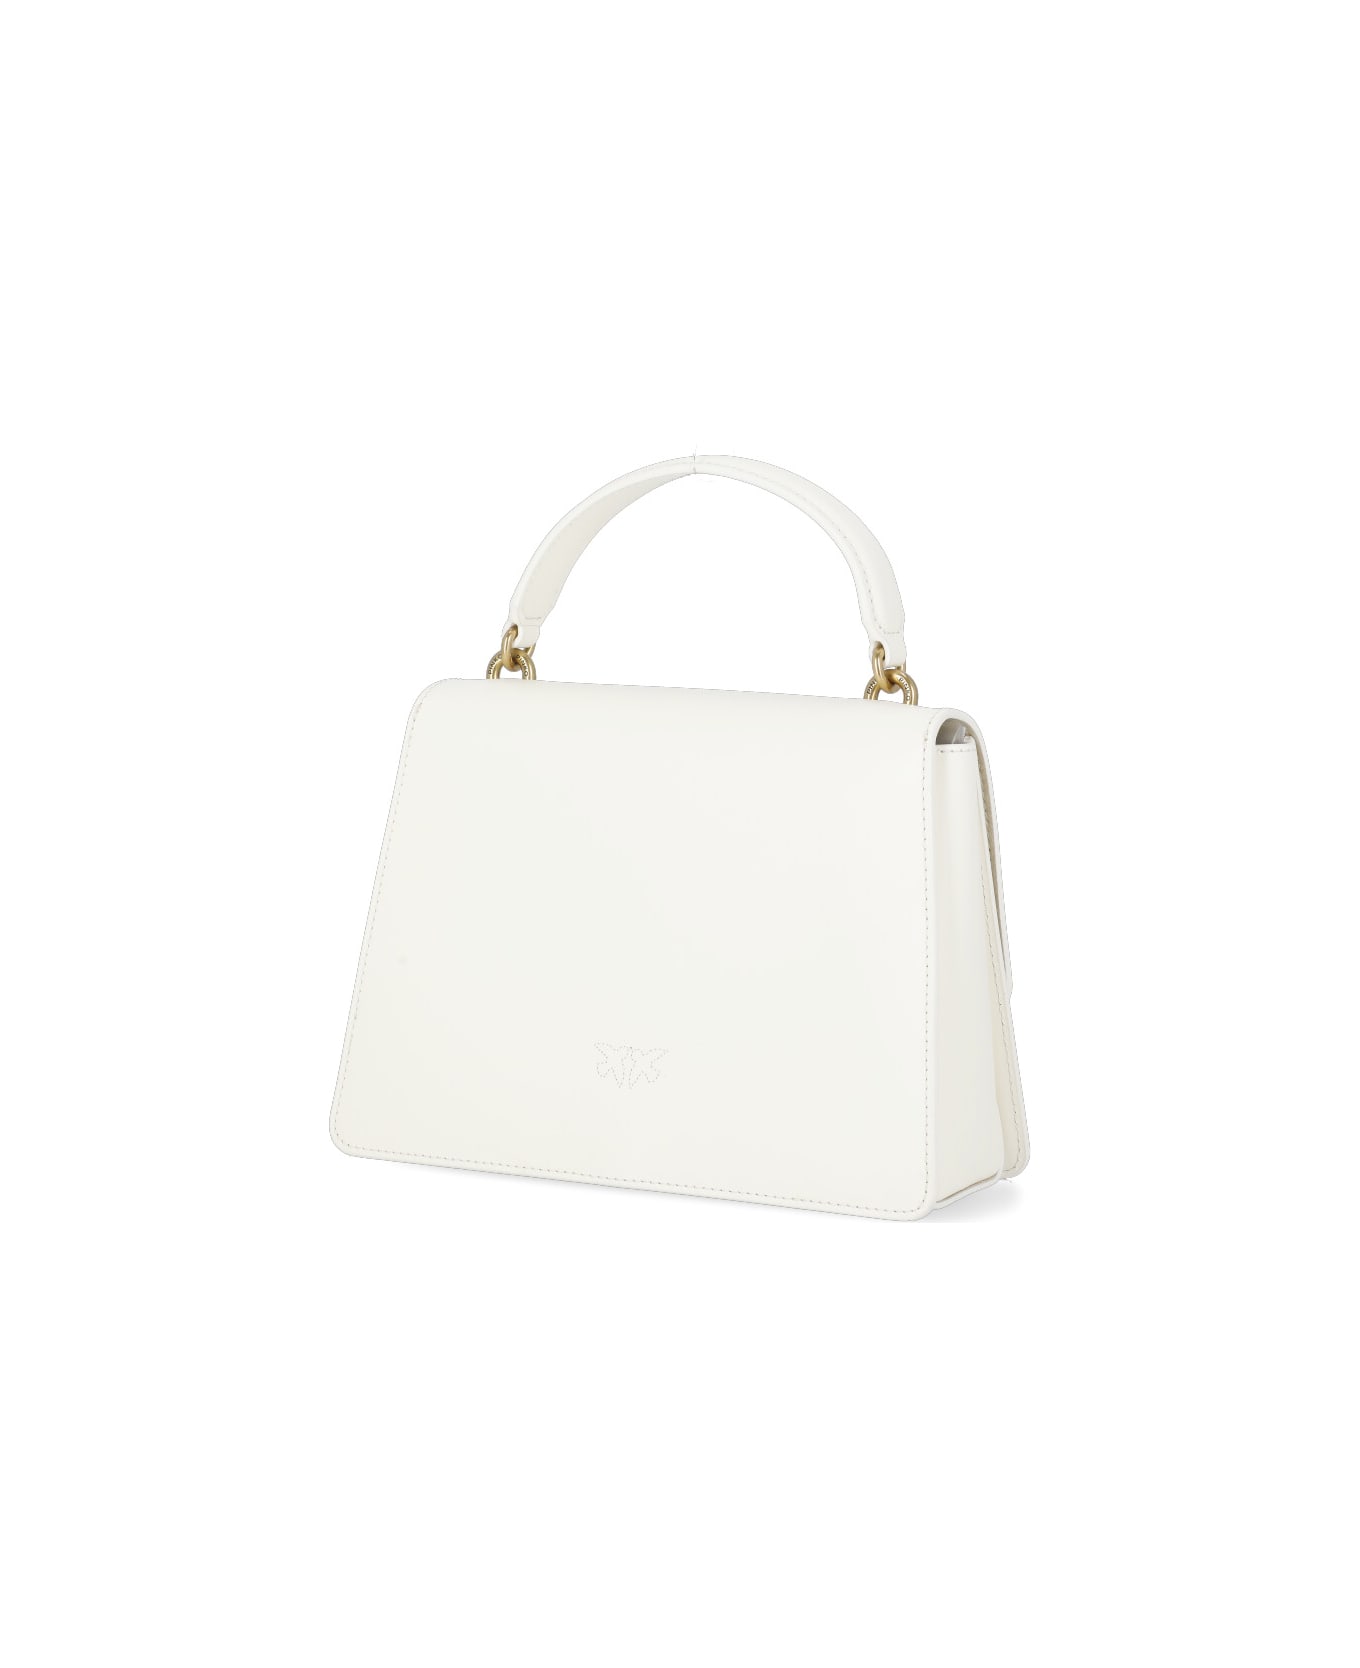 Pinko Love One Top Handle Tote - White トートバッグ